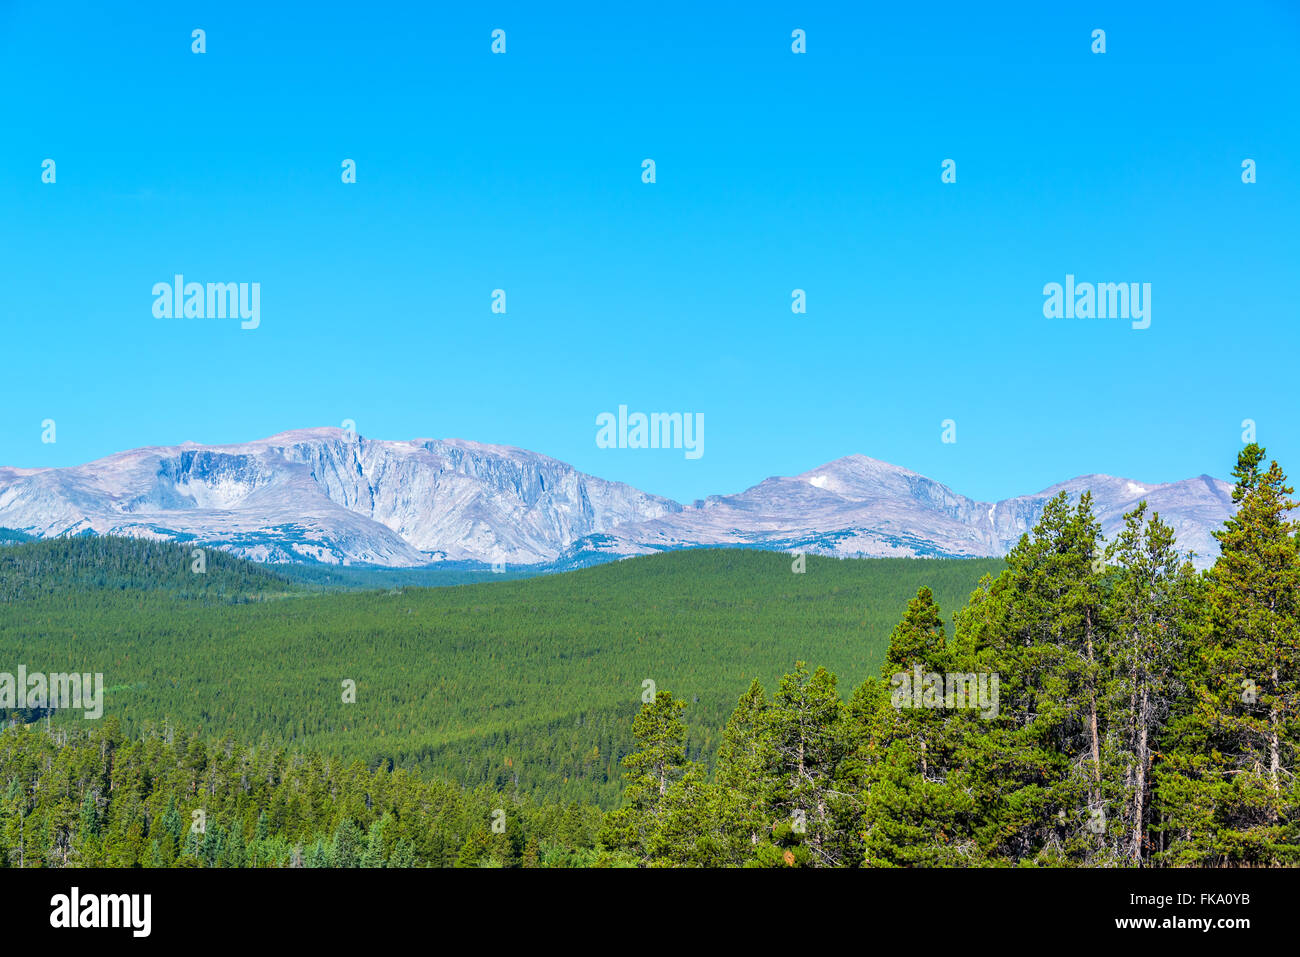 Bighorn Mountain Range rising above a dense evergreen forest in Wyoming Stock Photo